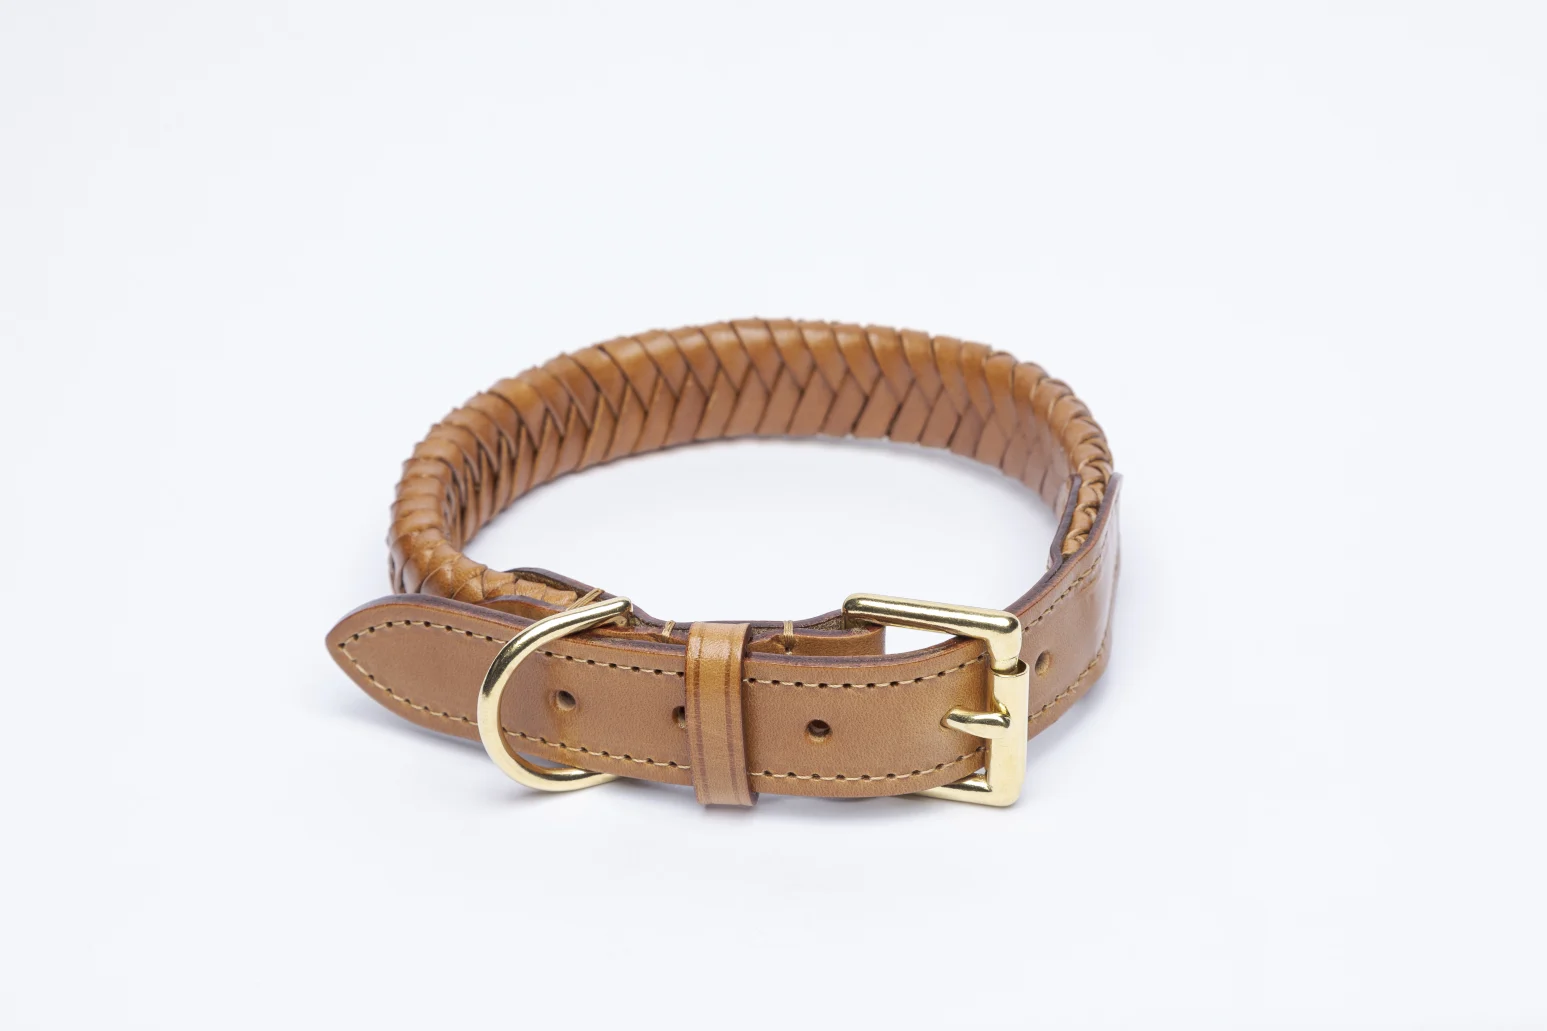 Plaited Dog Collar in Vegetable Tan Leather in Tan coiled